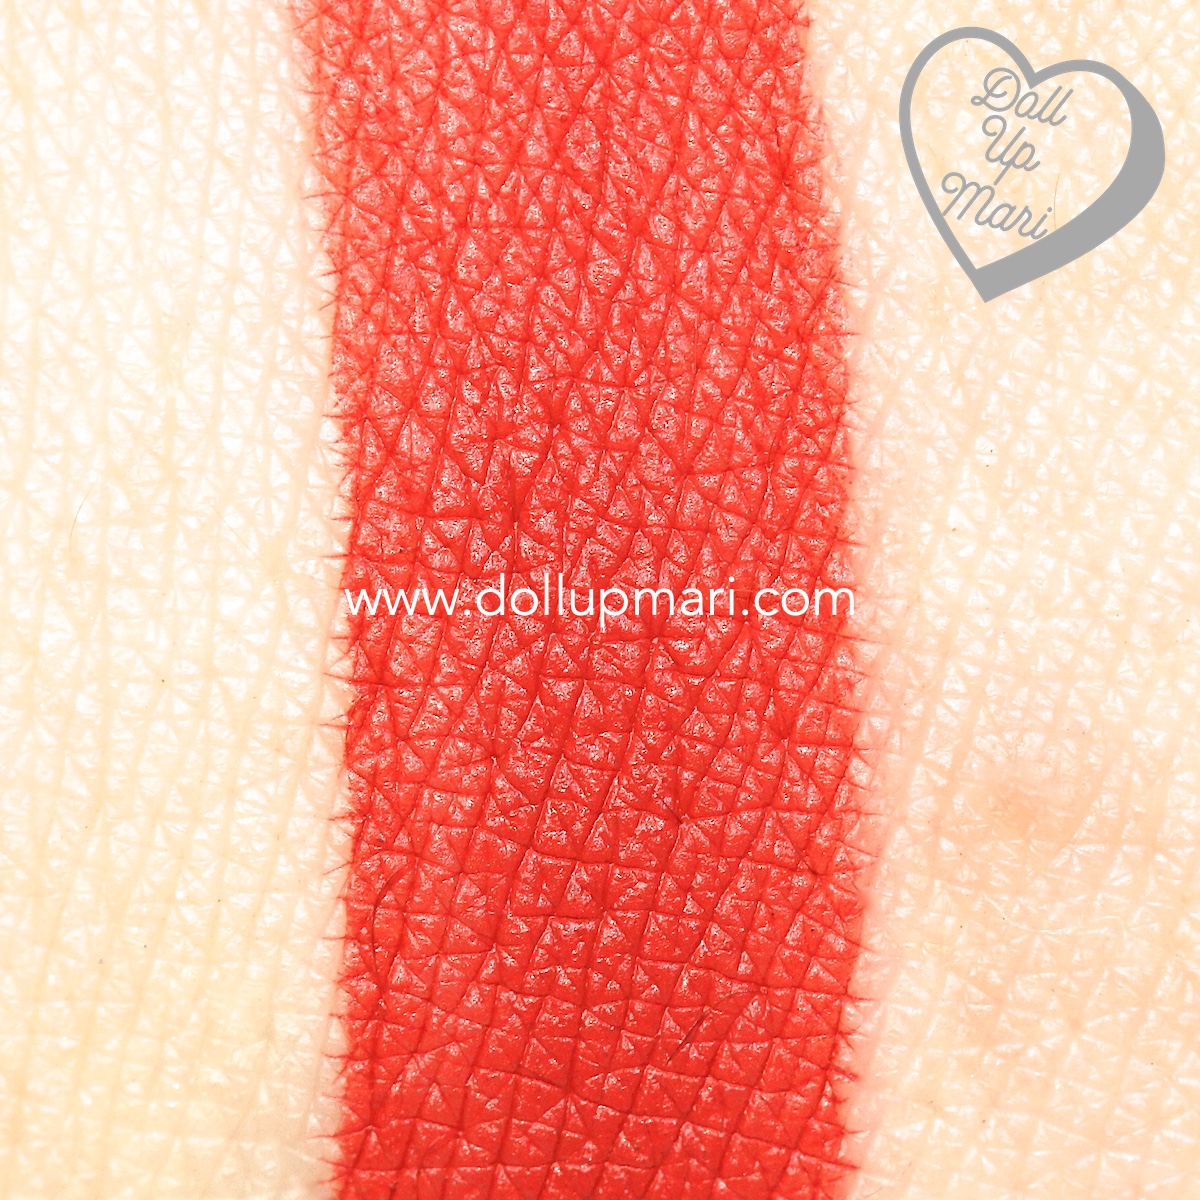 Swatch of Wearing 285 Gritty shade of Maybelline Superstay Matte Ink Liquid Lipstick Rogue Reds